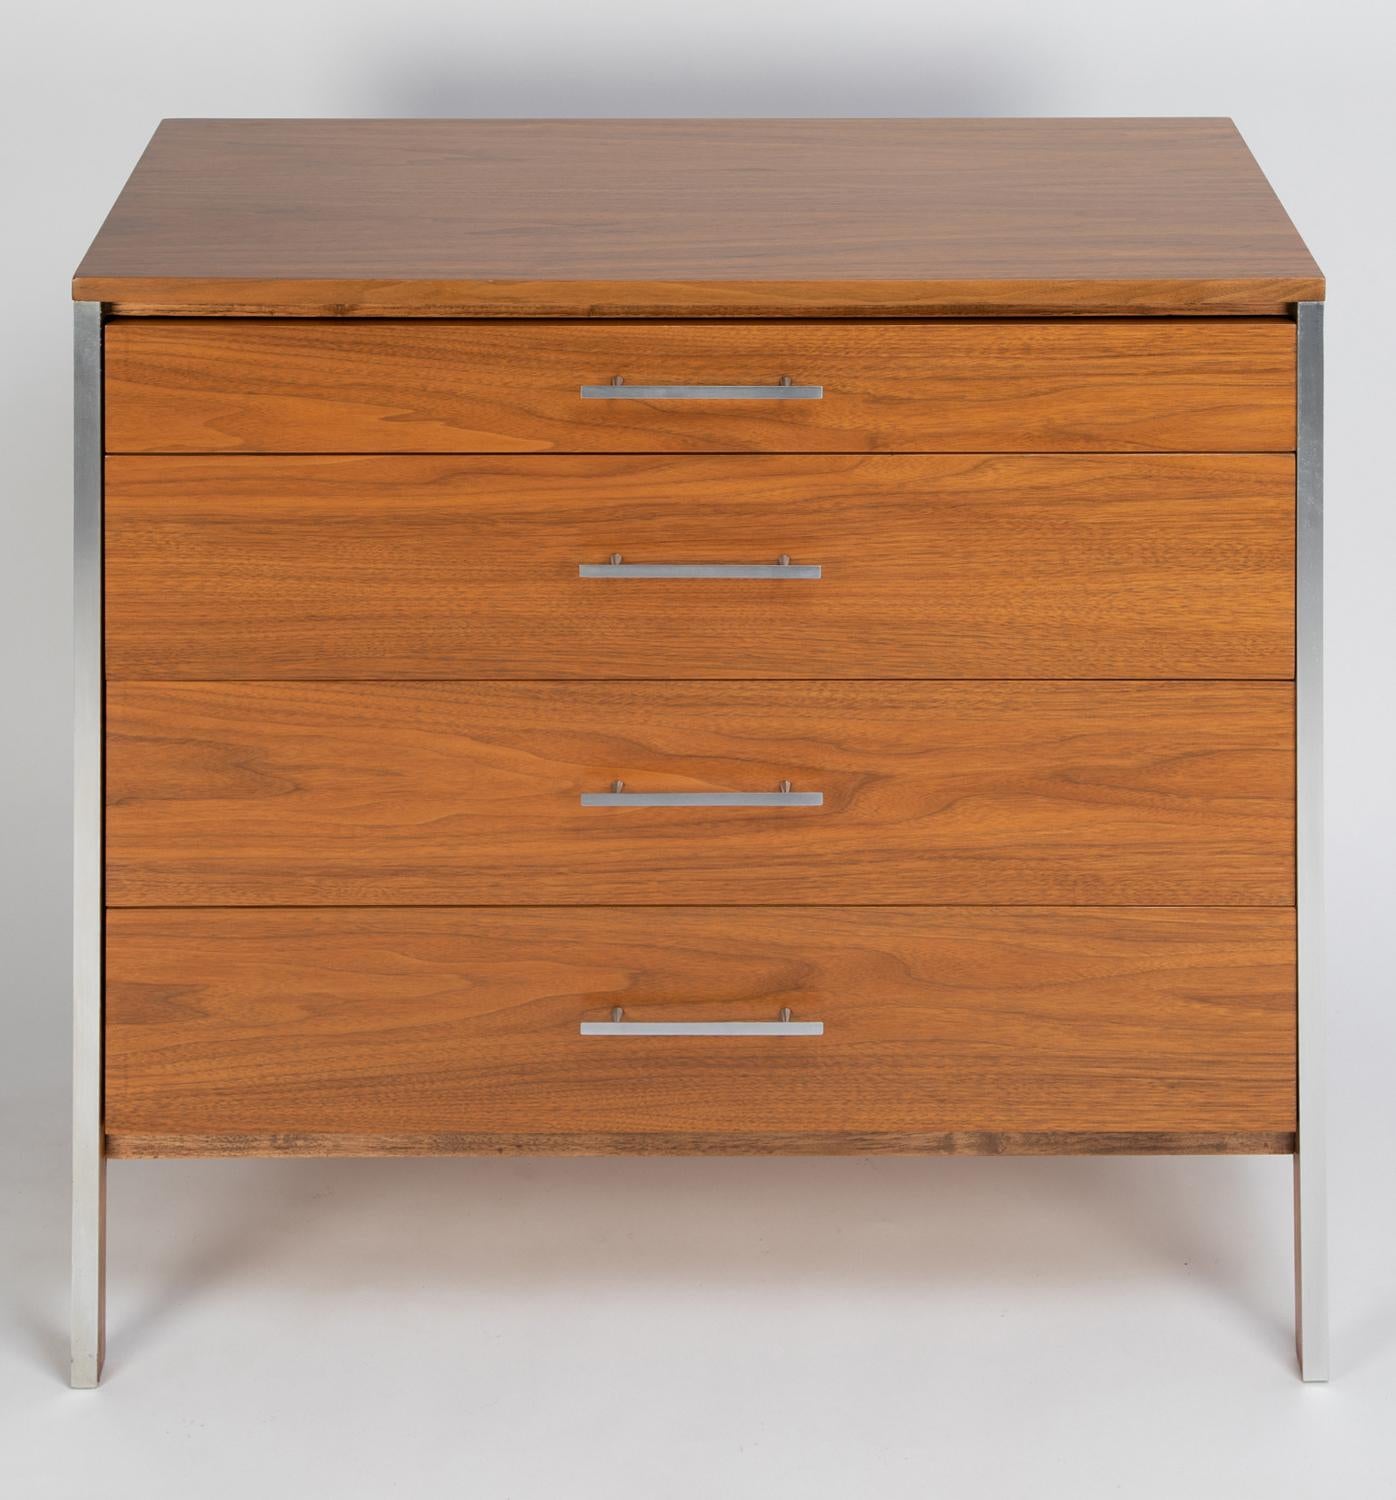 Pair of 4 drawer chests in walnut with aluminum pulls and trim by Paul McCobb for Calvin Furniture, American 1960's.  These clean line chests would be used as bedside tables.  They are chic.